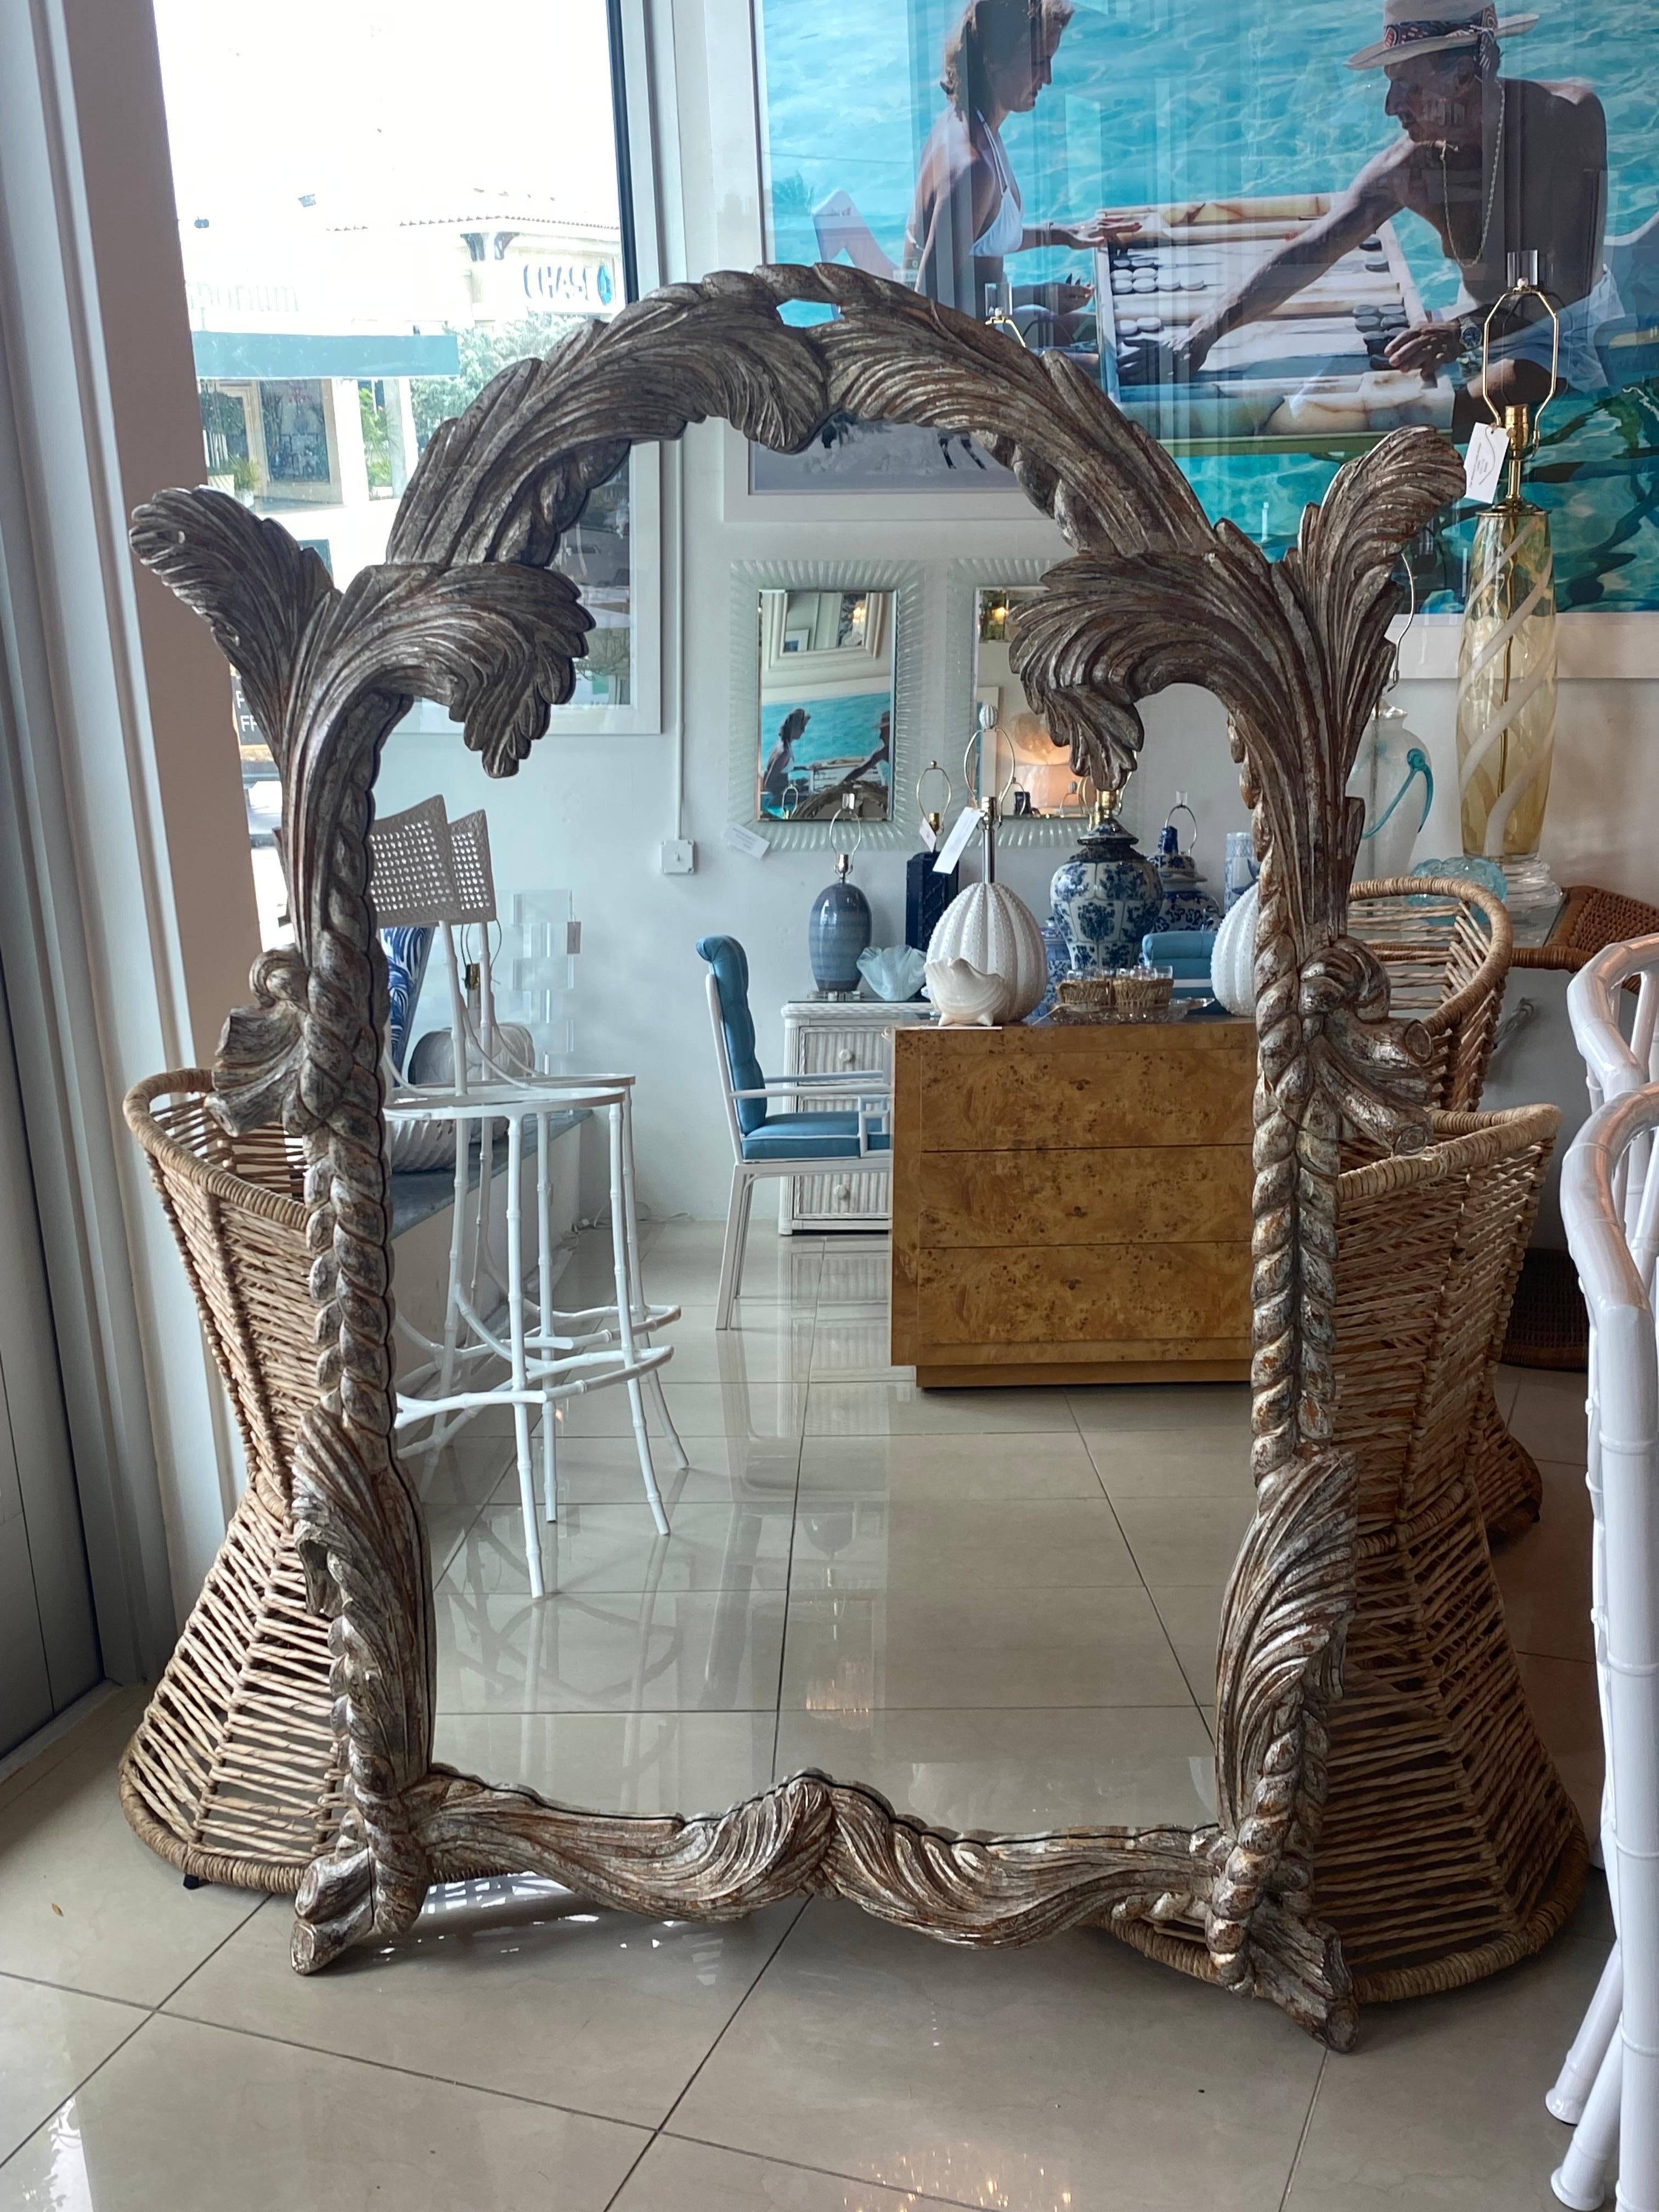 The most beautiful vintage LaBarge wall mirror! All hand carved wood with a lovely original silver gilt finish Made in Italy. This can be lacquered for an additional cost. The details are amazing, palm frond leaves and rope. Comes ready to hang.